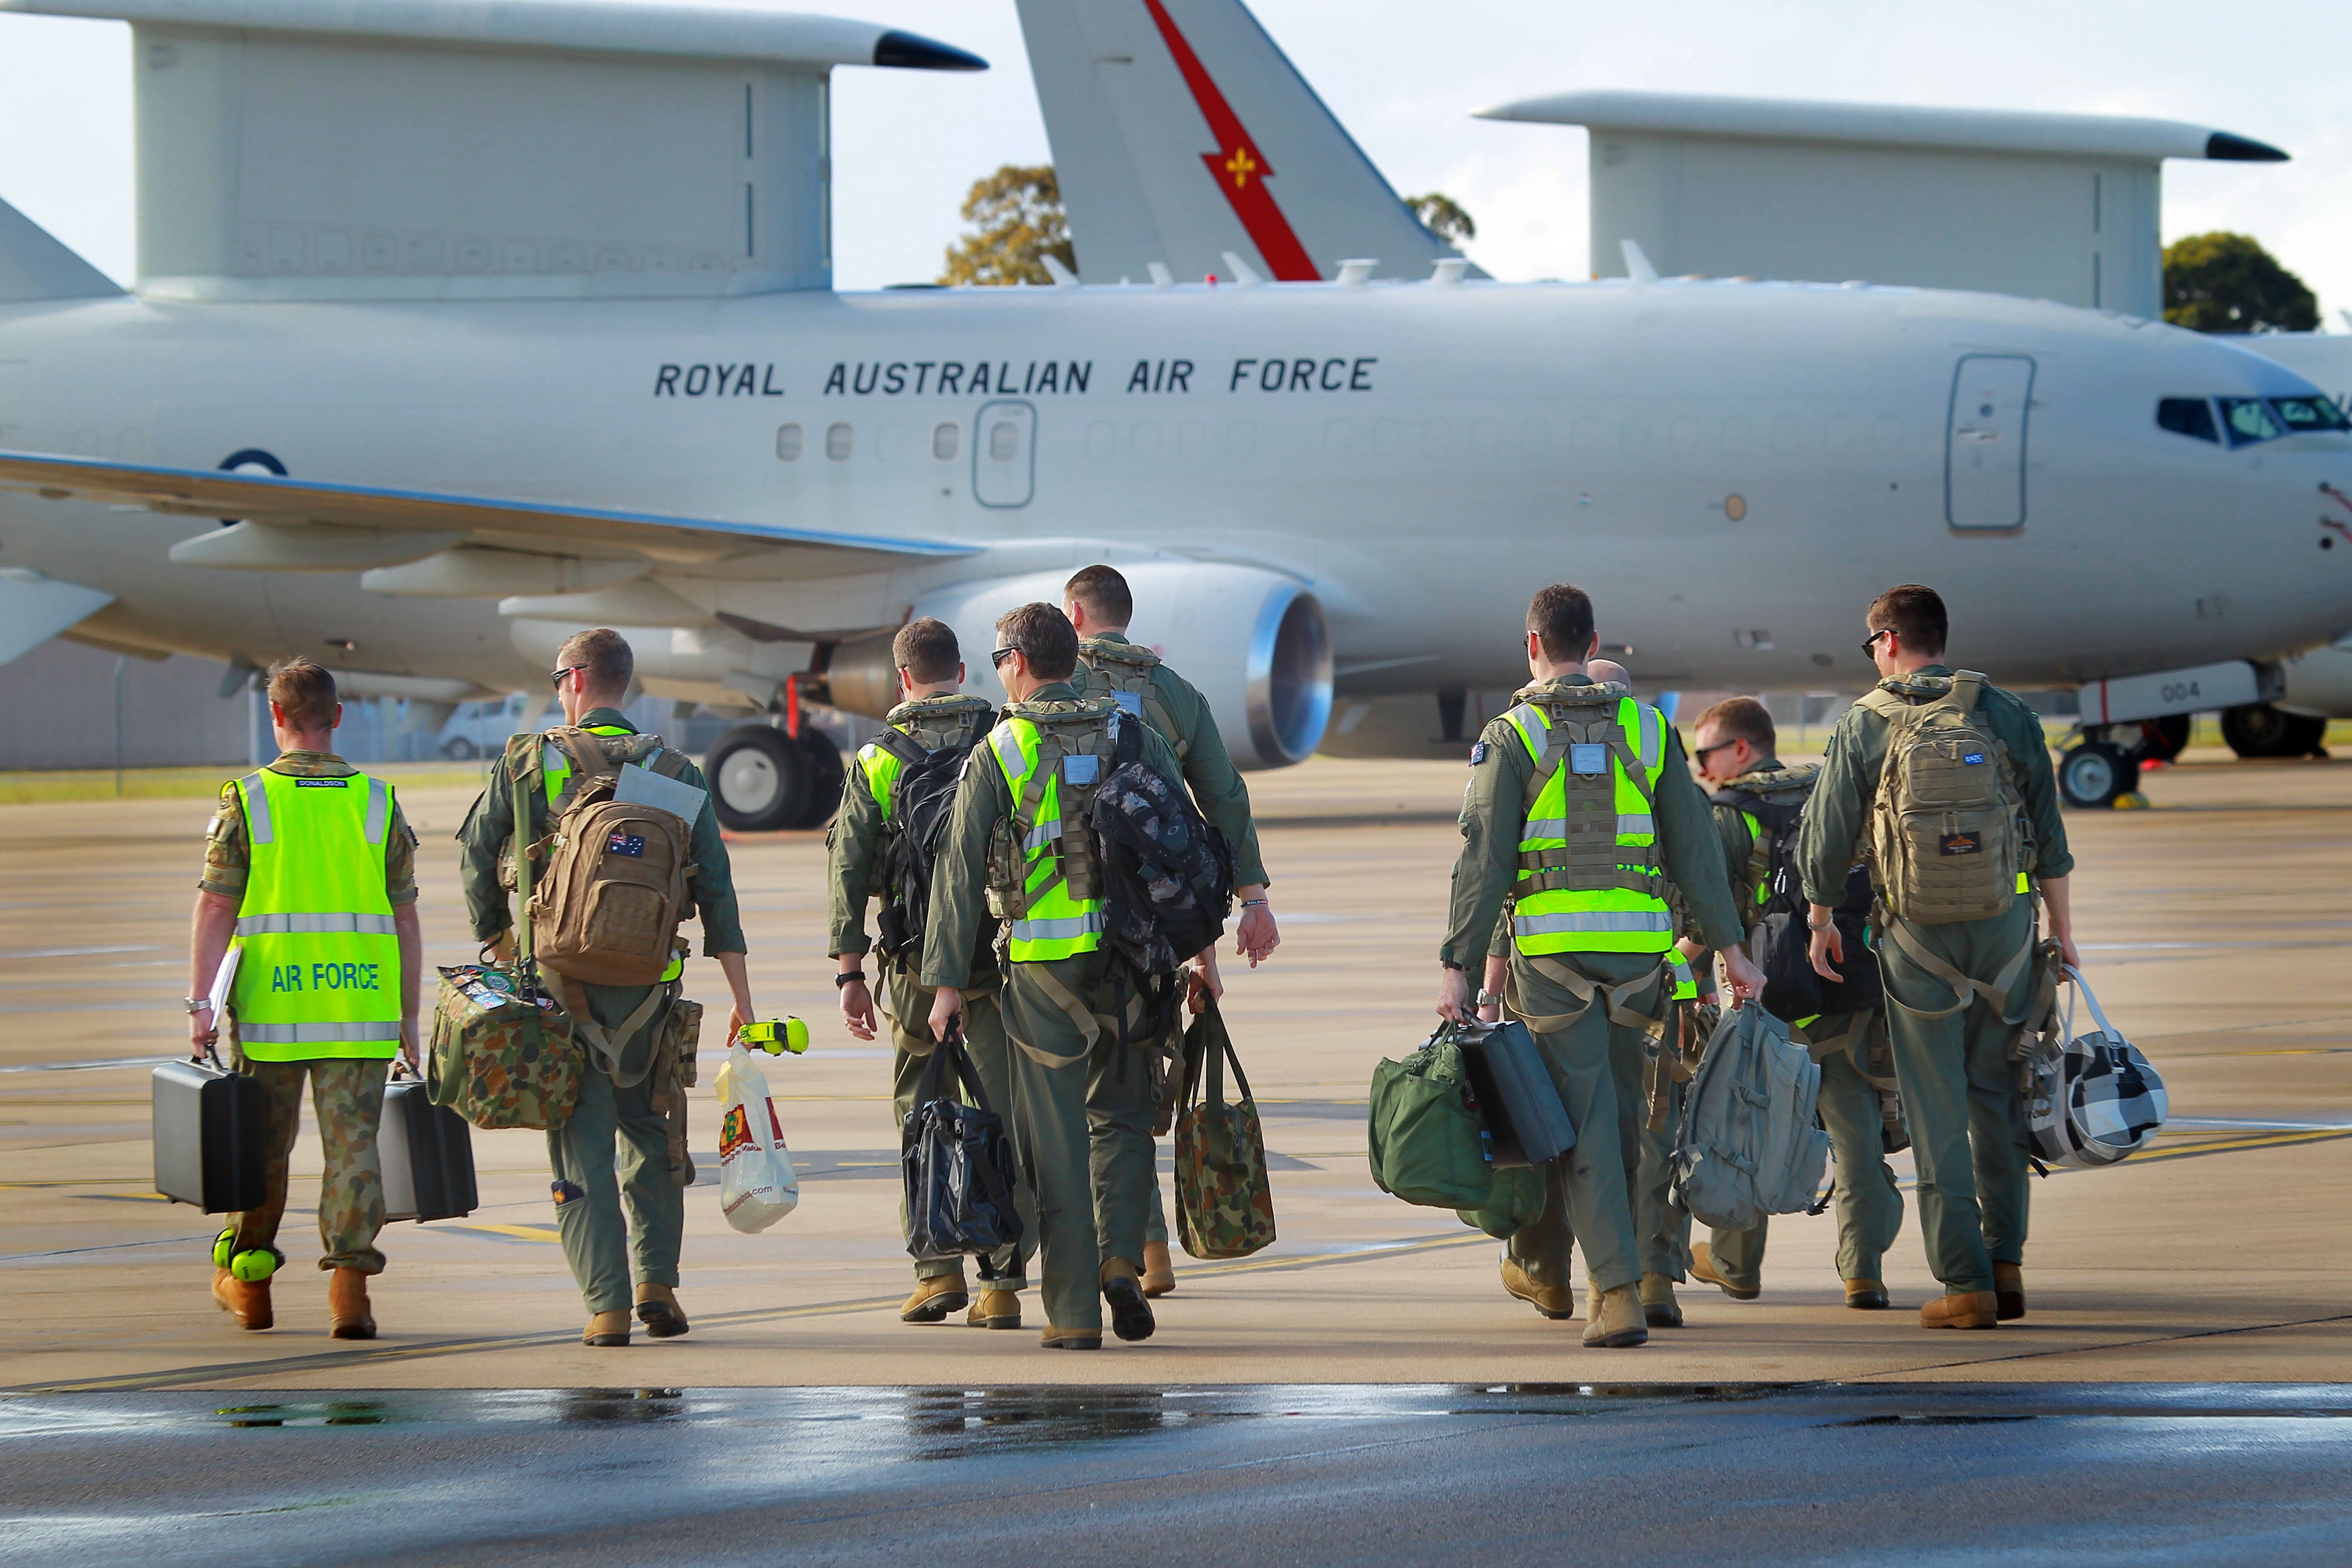 In this handout image provided by Commonwealth of Australia, air crew prepare to board the the E-7A Wedgetail Airborne Early Warning and Control aircraft for deployment to the Middle East on September 21, 2014 in Williamtown, Australia. RAAF has decided to ban gendered terms like ‘airmen’ and rather use ‘aviators’